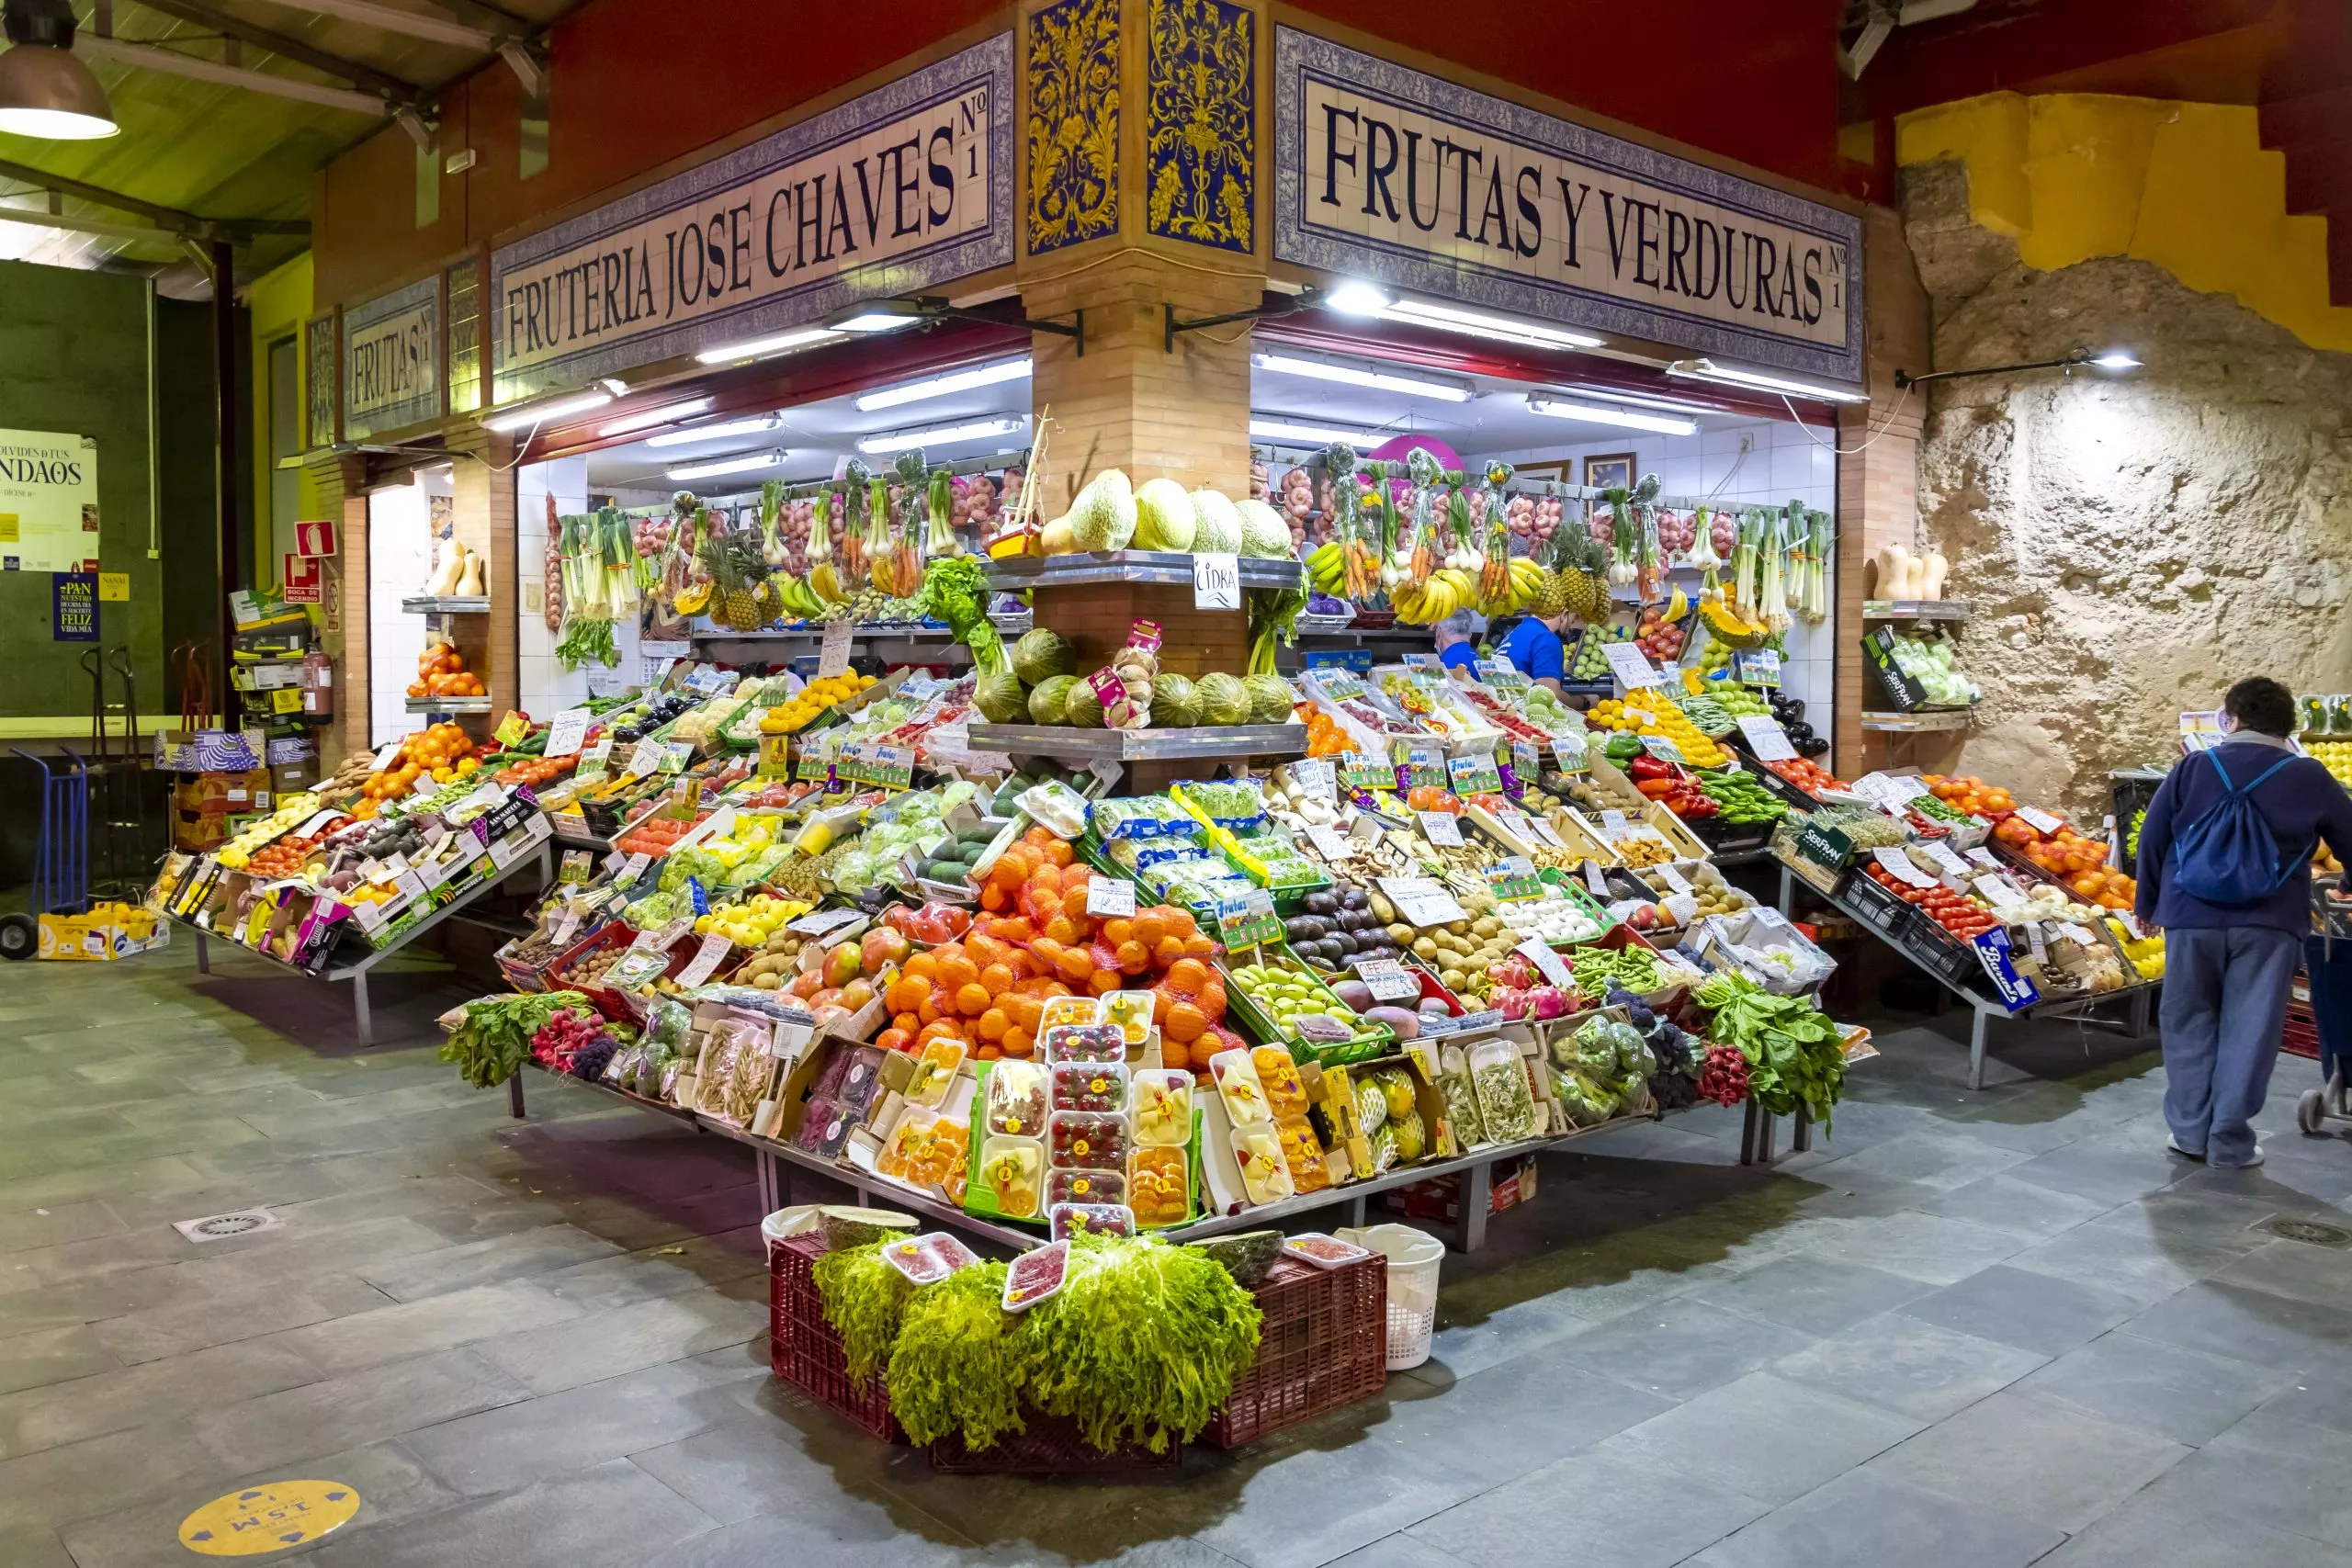 Fruit, vegetable, meat and produce vendors and stalls inside the colorful and vibrant Triana Market or Mercado di Triana in the historic Triana district of the Andalusian city of Seville Spain.